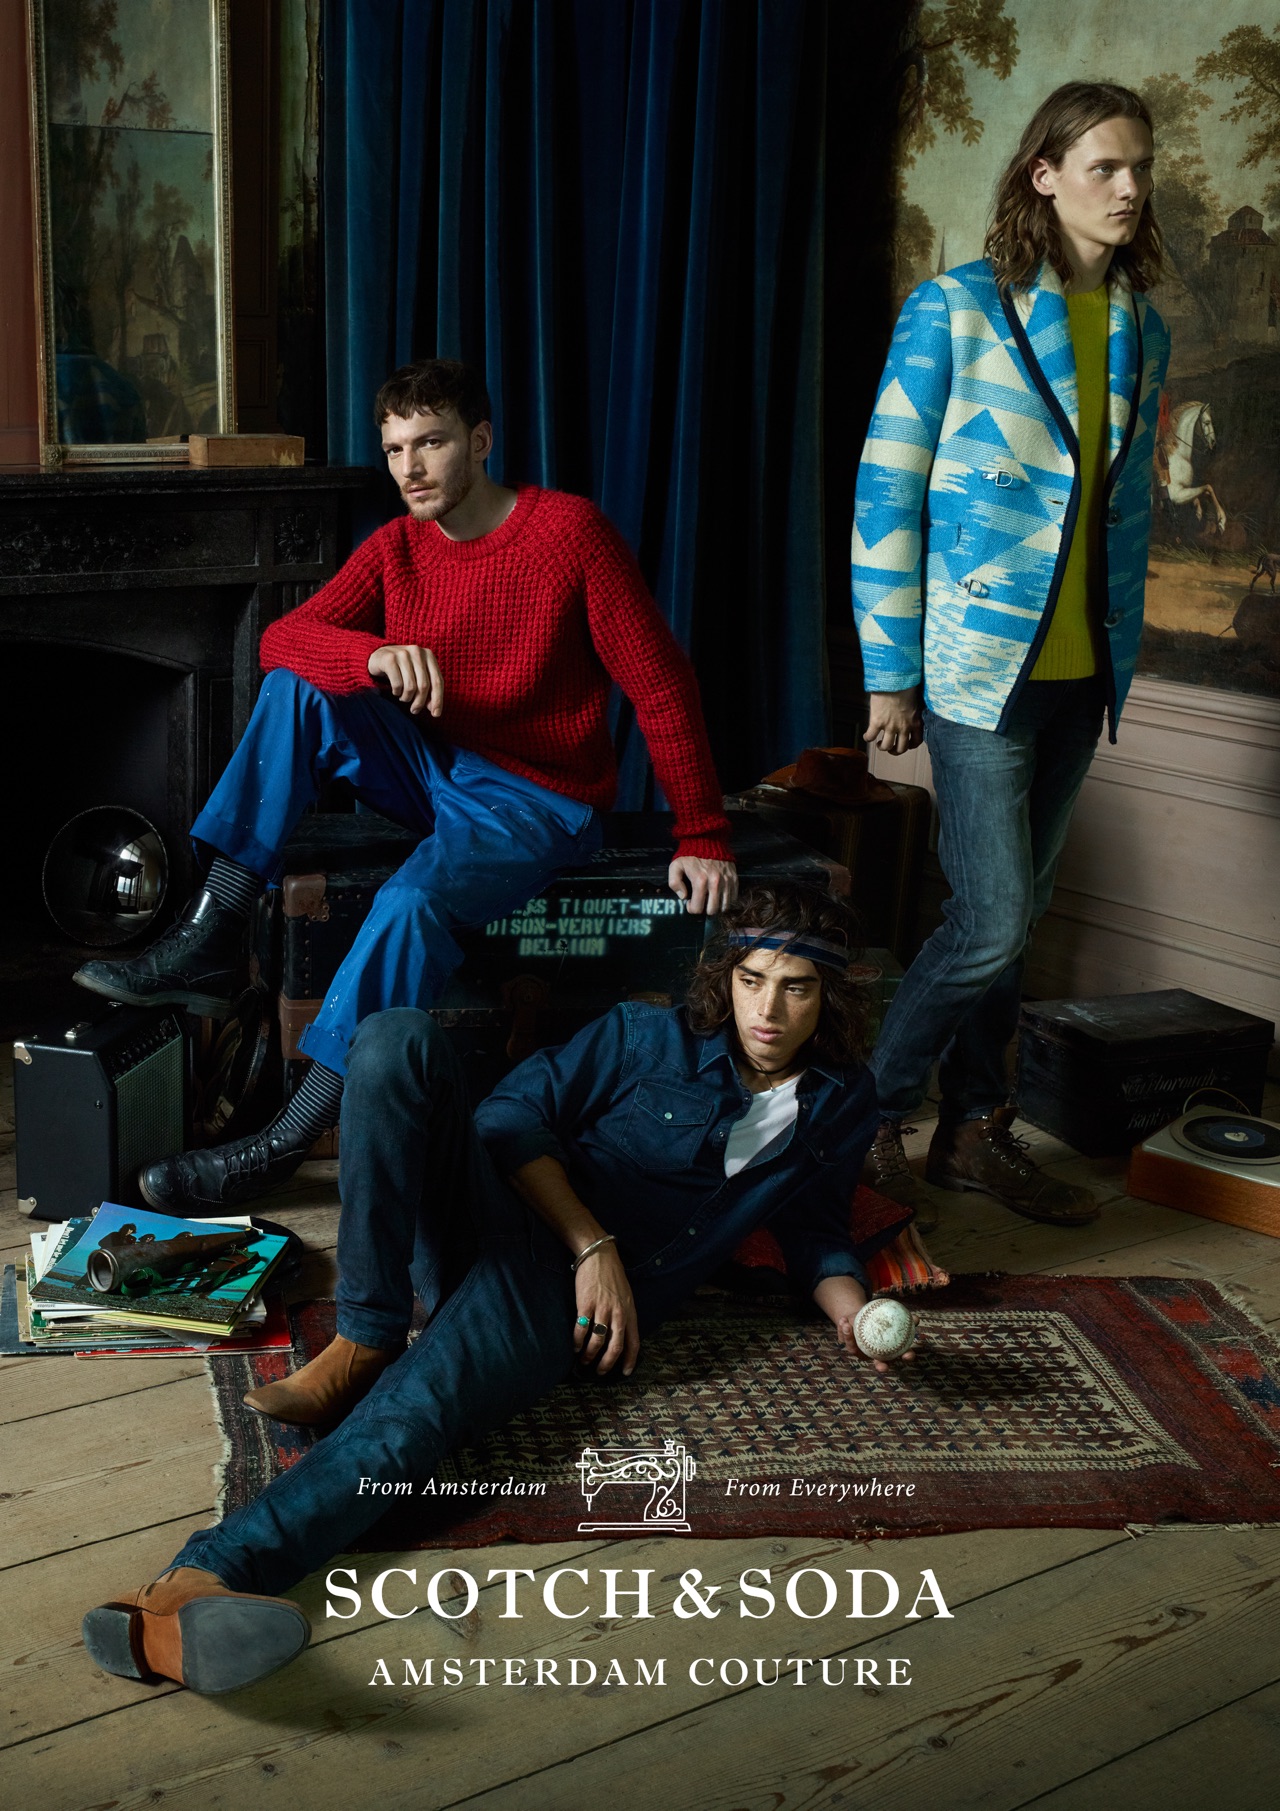 #ClientStyle Scotch & Soda FW/16 Campaign with Video | Client Magazine